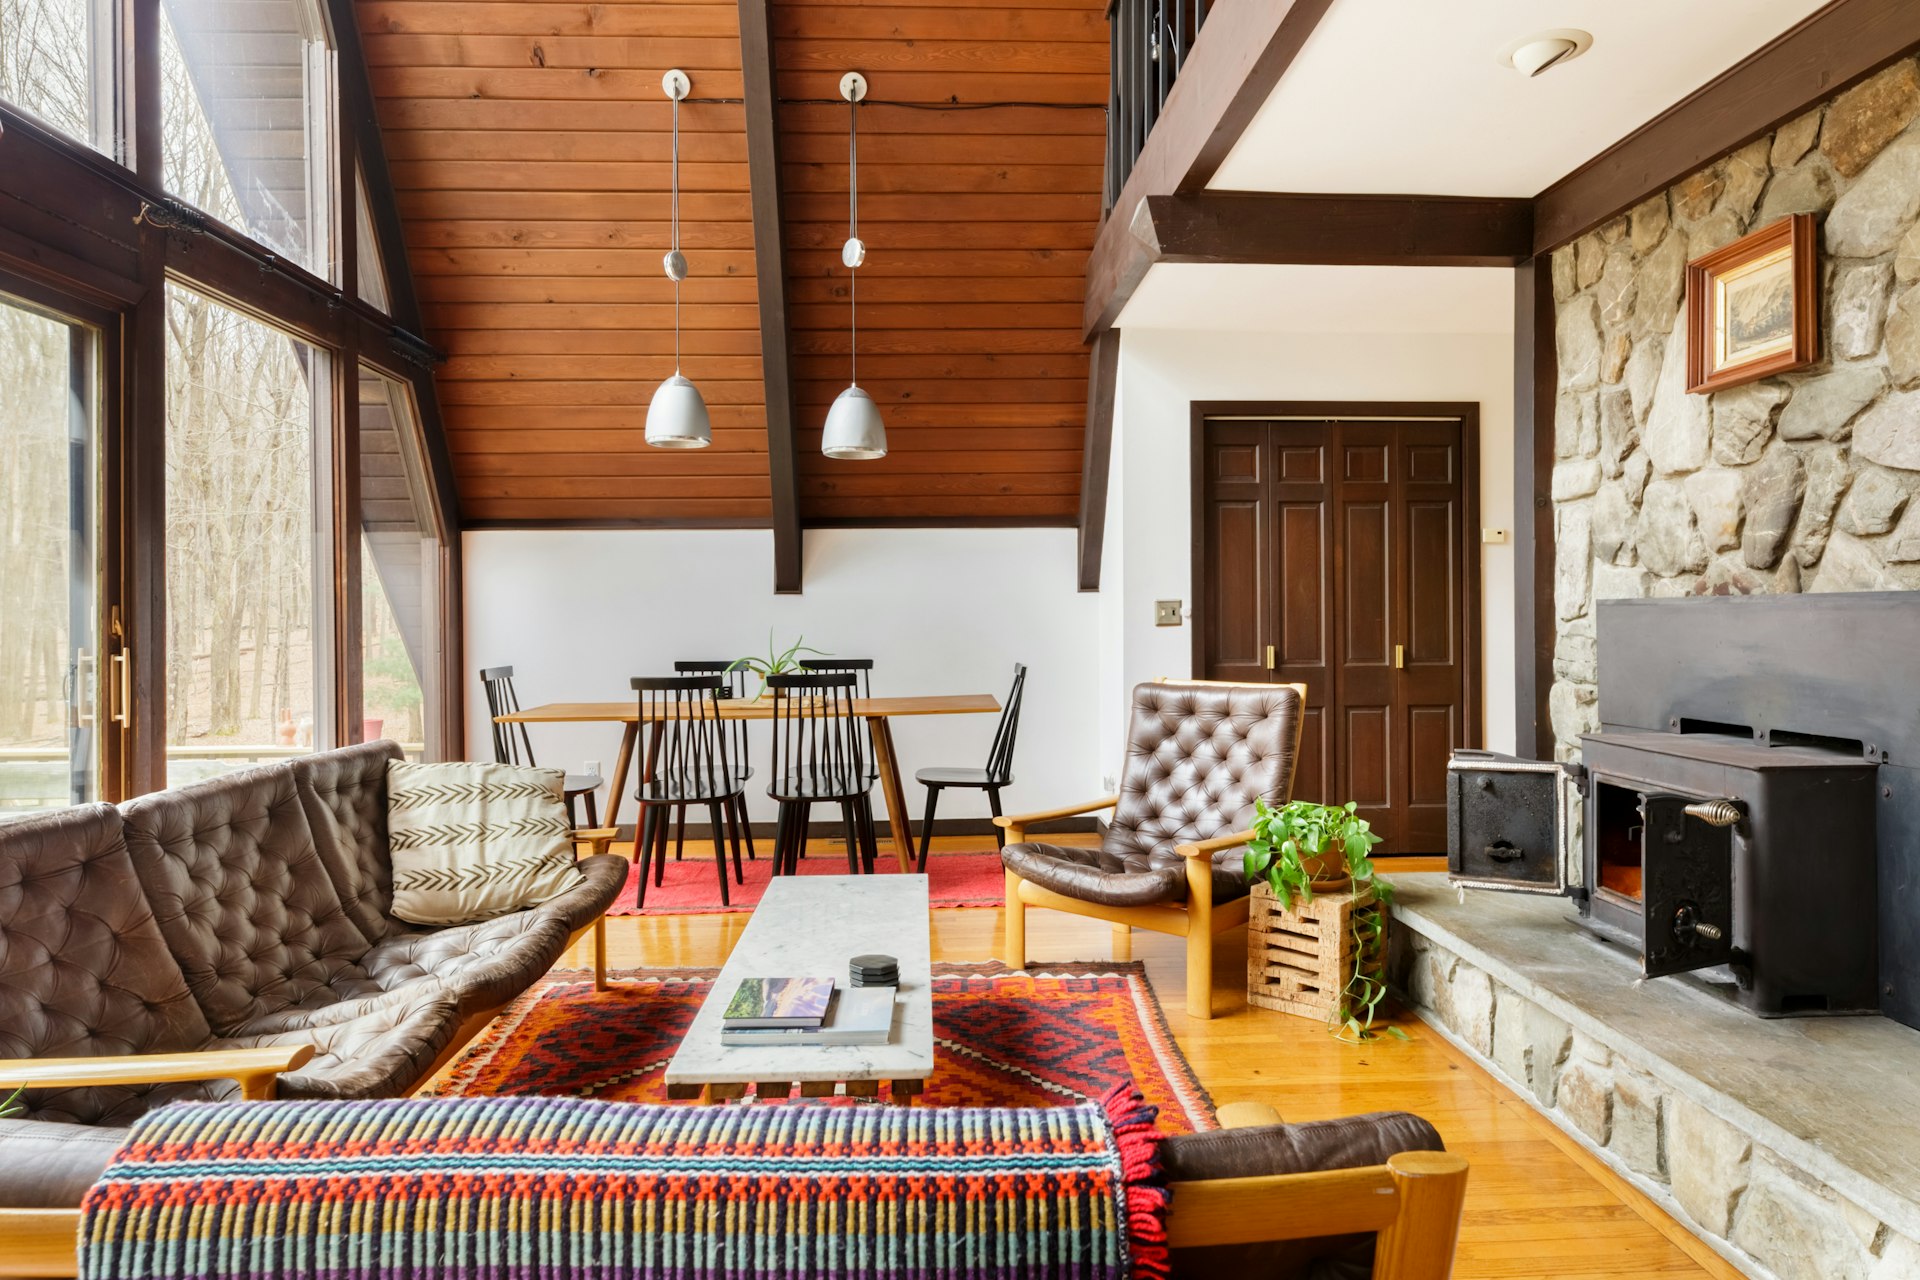 The mid-century modern living room of an A-frame cabin in the Hudson Valley